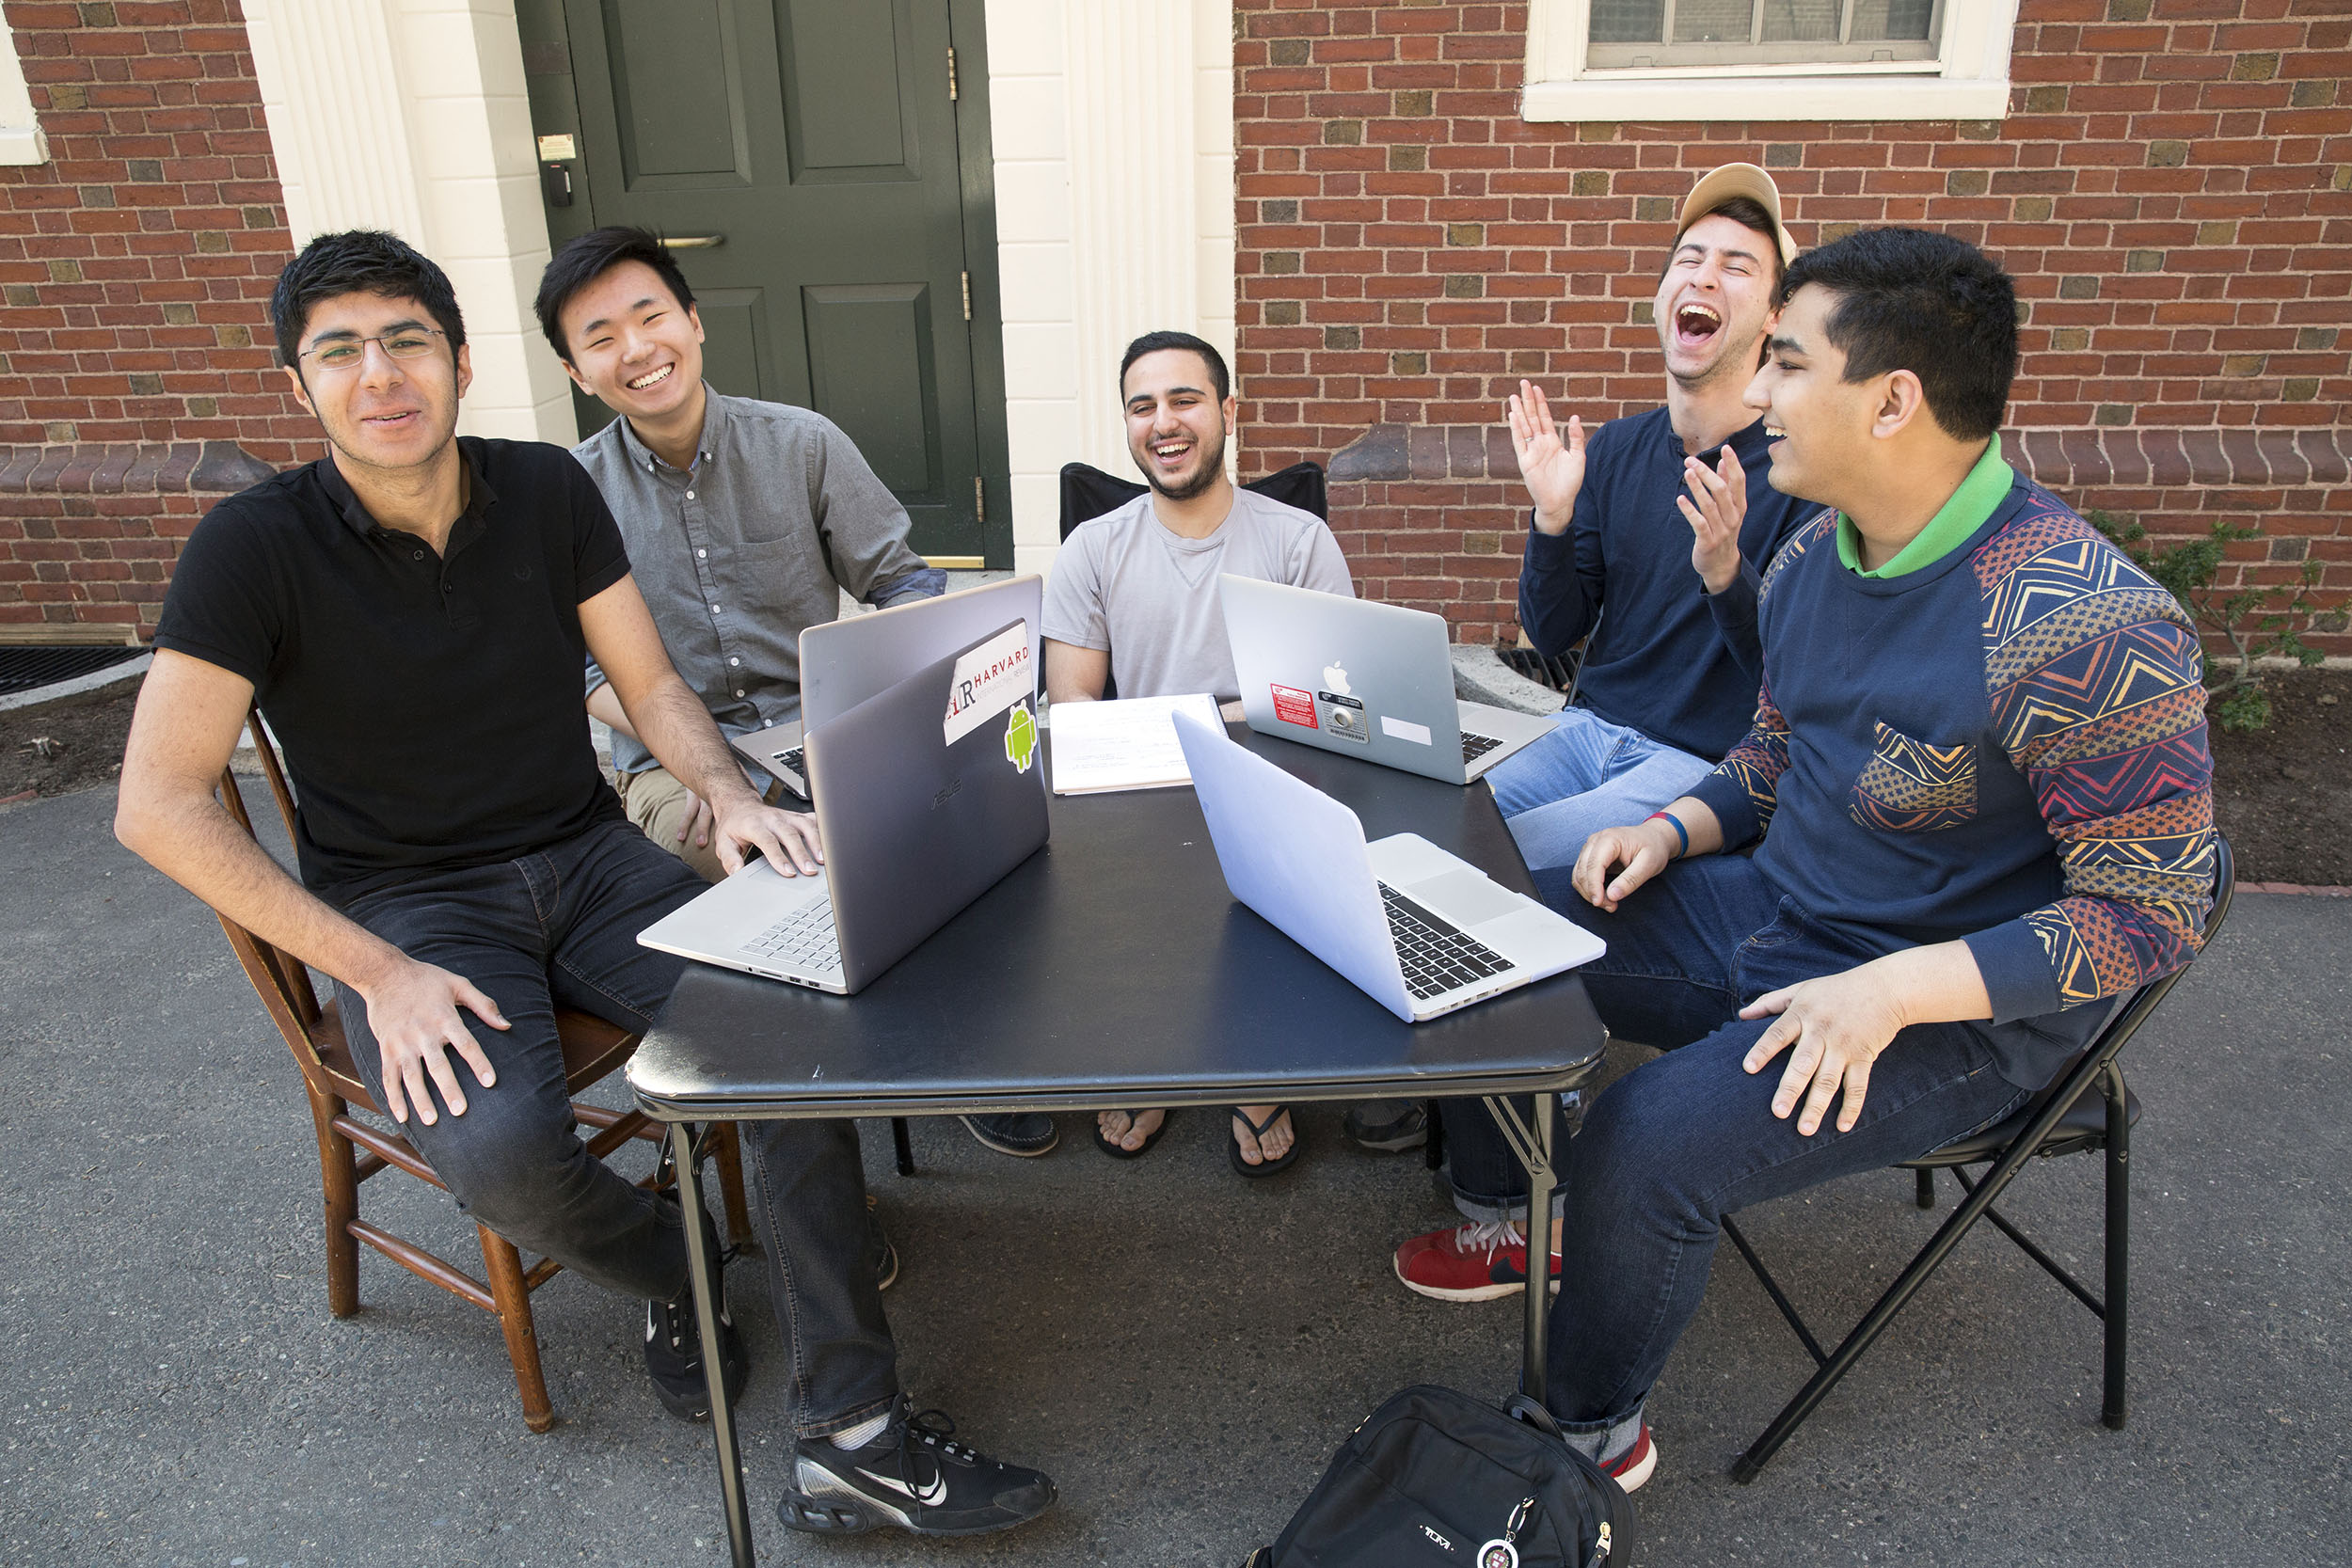 Roommates in Wigglesworth sit outside their dorm on what they call their "porch": (l to r) Soheil Sadabadi '20 (Iran), Andrew Cho '20 (AZ), Michael Shadpour '20 (CA), Scott Kall '20 (MA), and Arpan Sarkar '20 (TN).